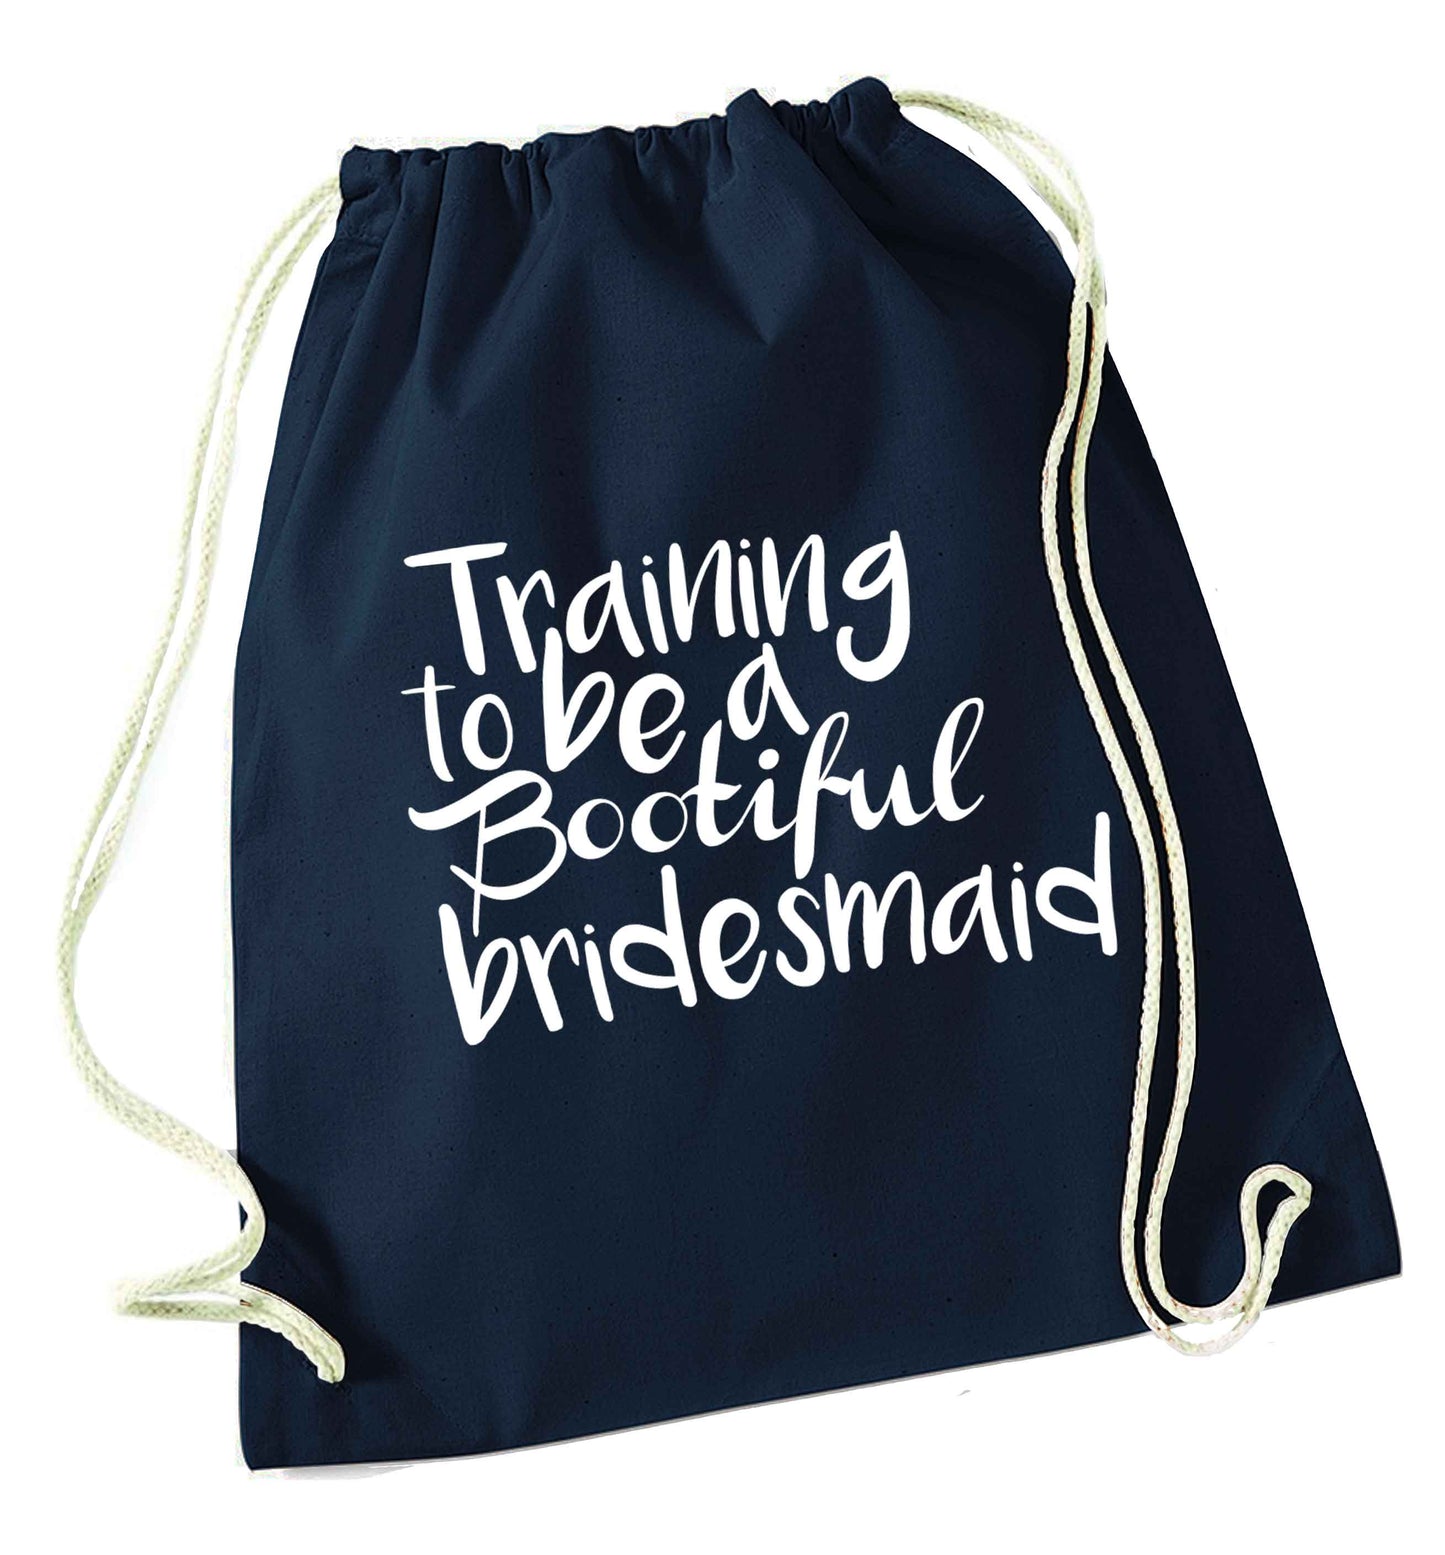 Get motivated and get fit for your big day! Our workout quotes and designs will get you ready to sweat! Perfect for any bride, groom or bridesmaid to be!  navy drawstring bag